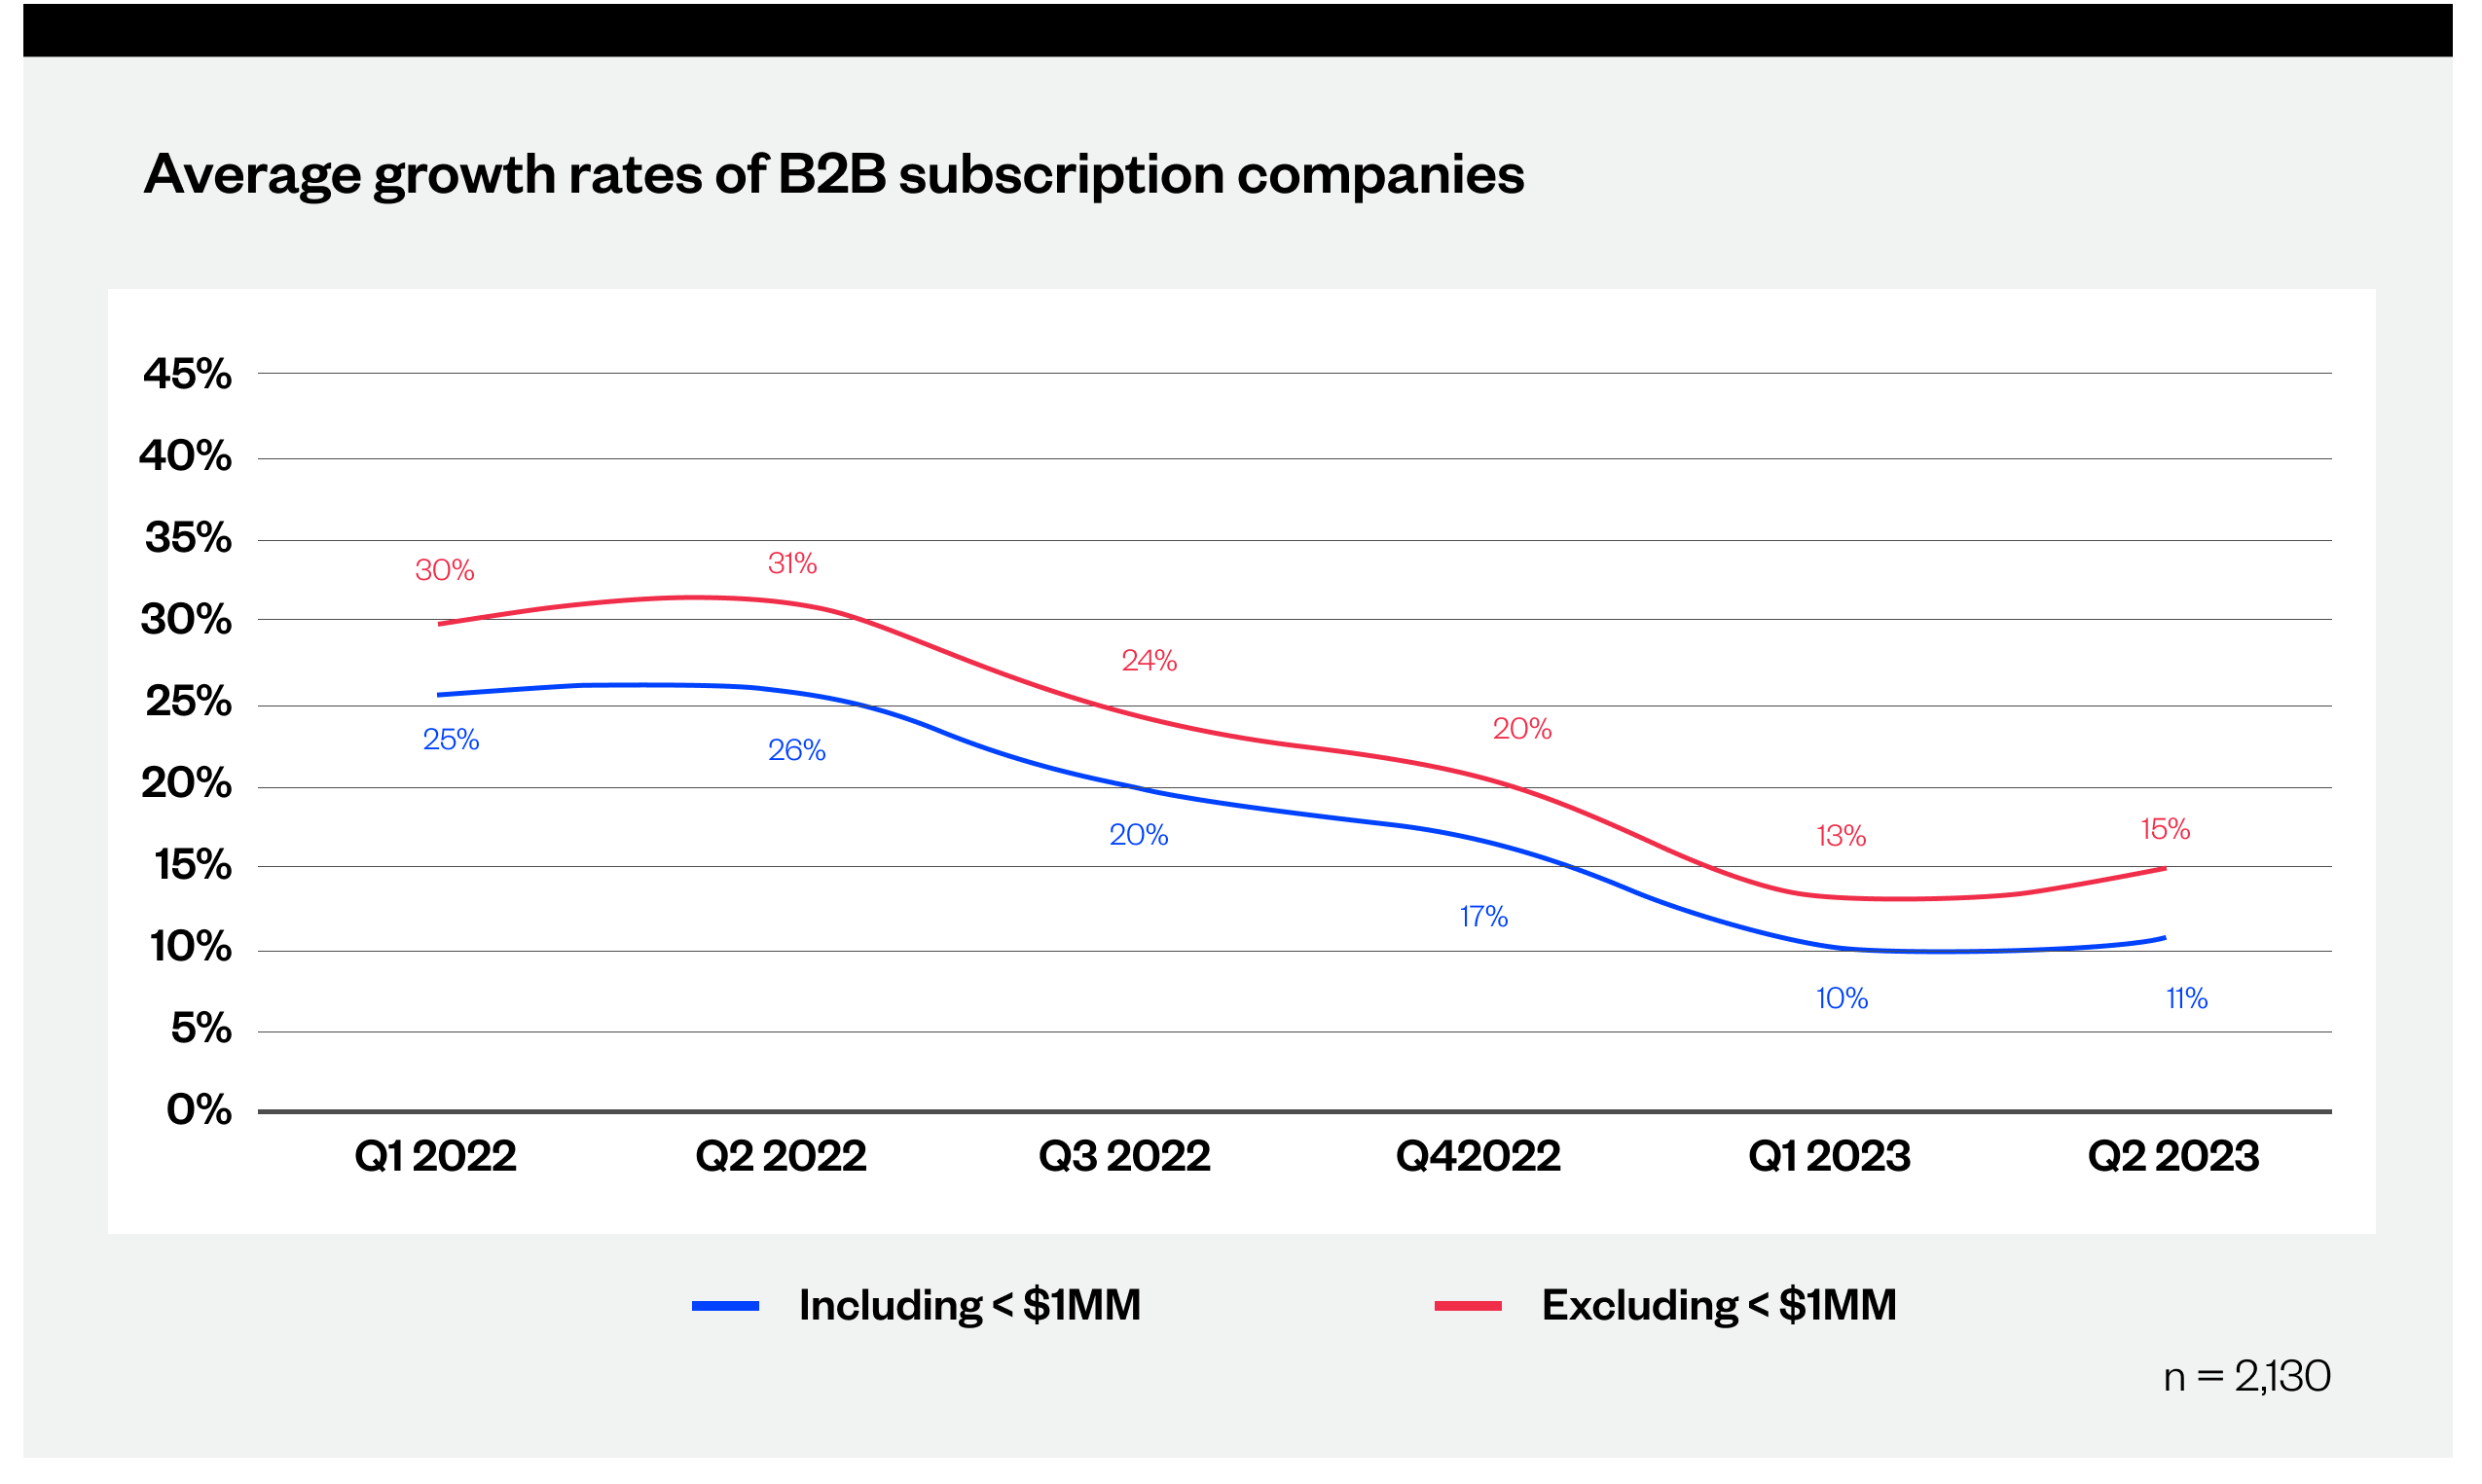 B2B subscription businesses have continued to grow since the beginning of 2022s, averaging 10-15% YoY growth throughout the first two quarters of 2023